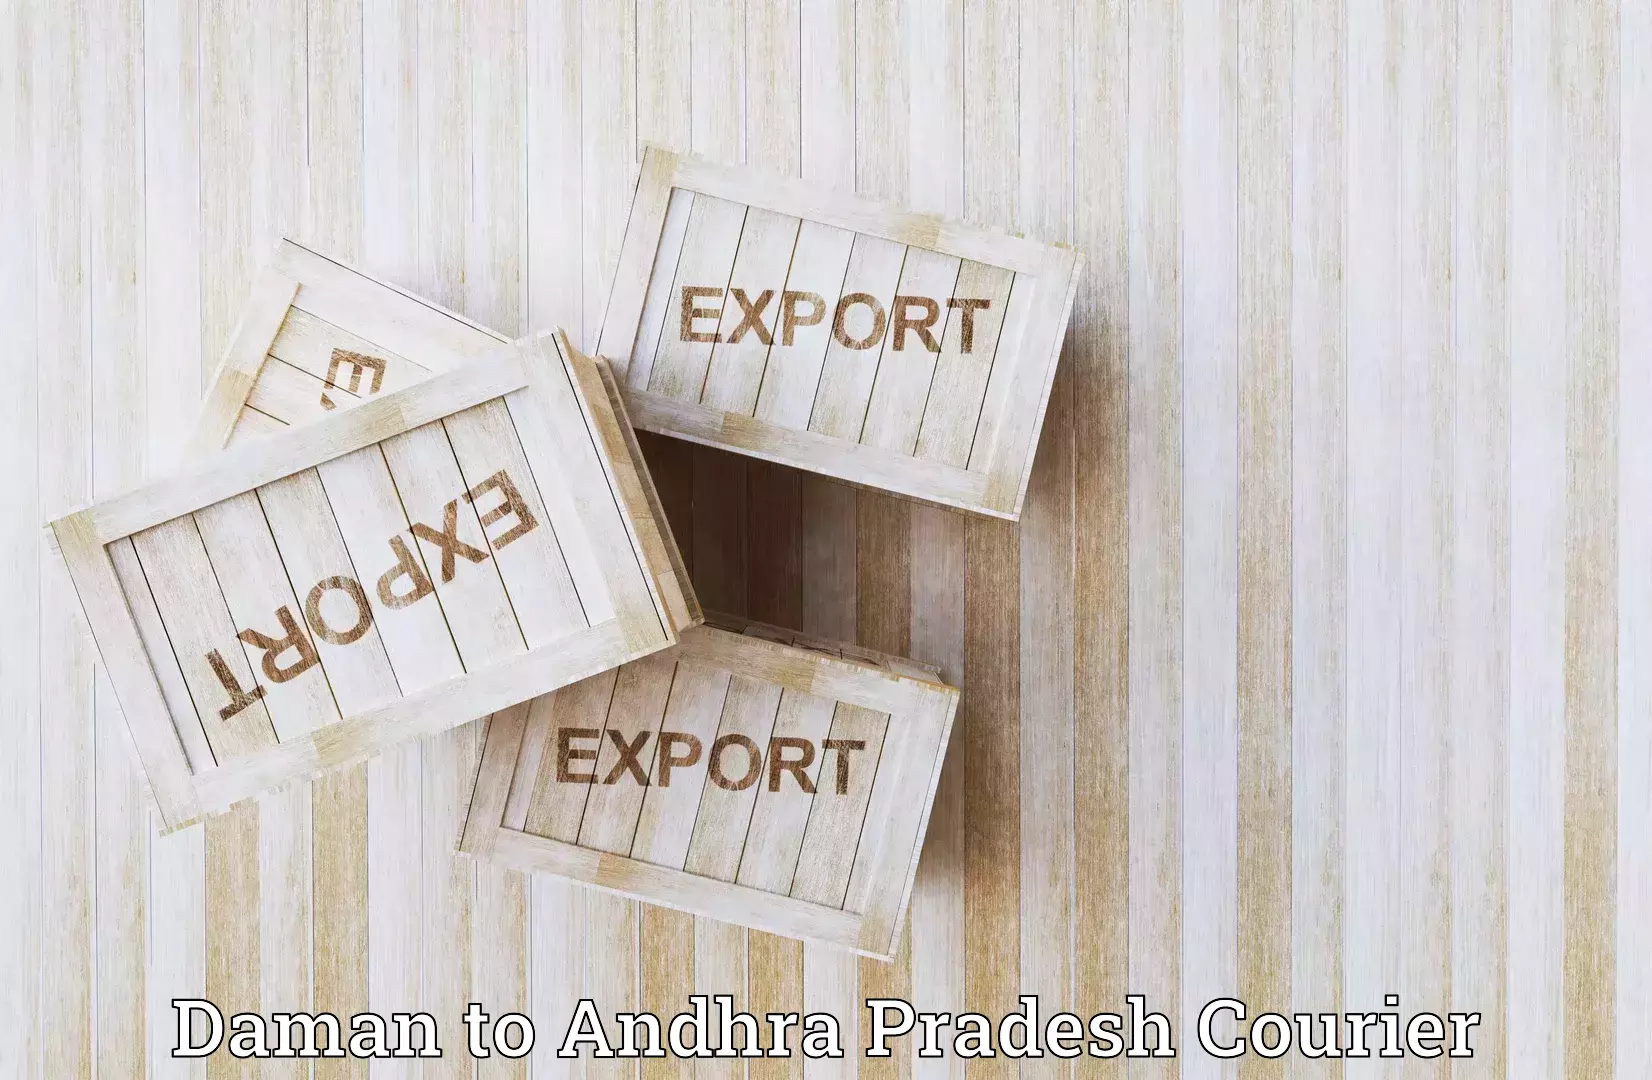 Affordable shipping solutions Daman to Visakhapatnam Port